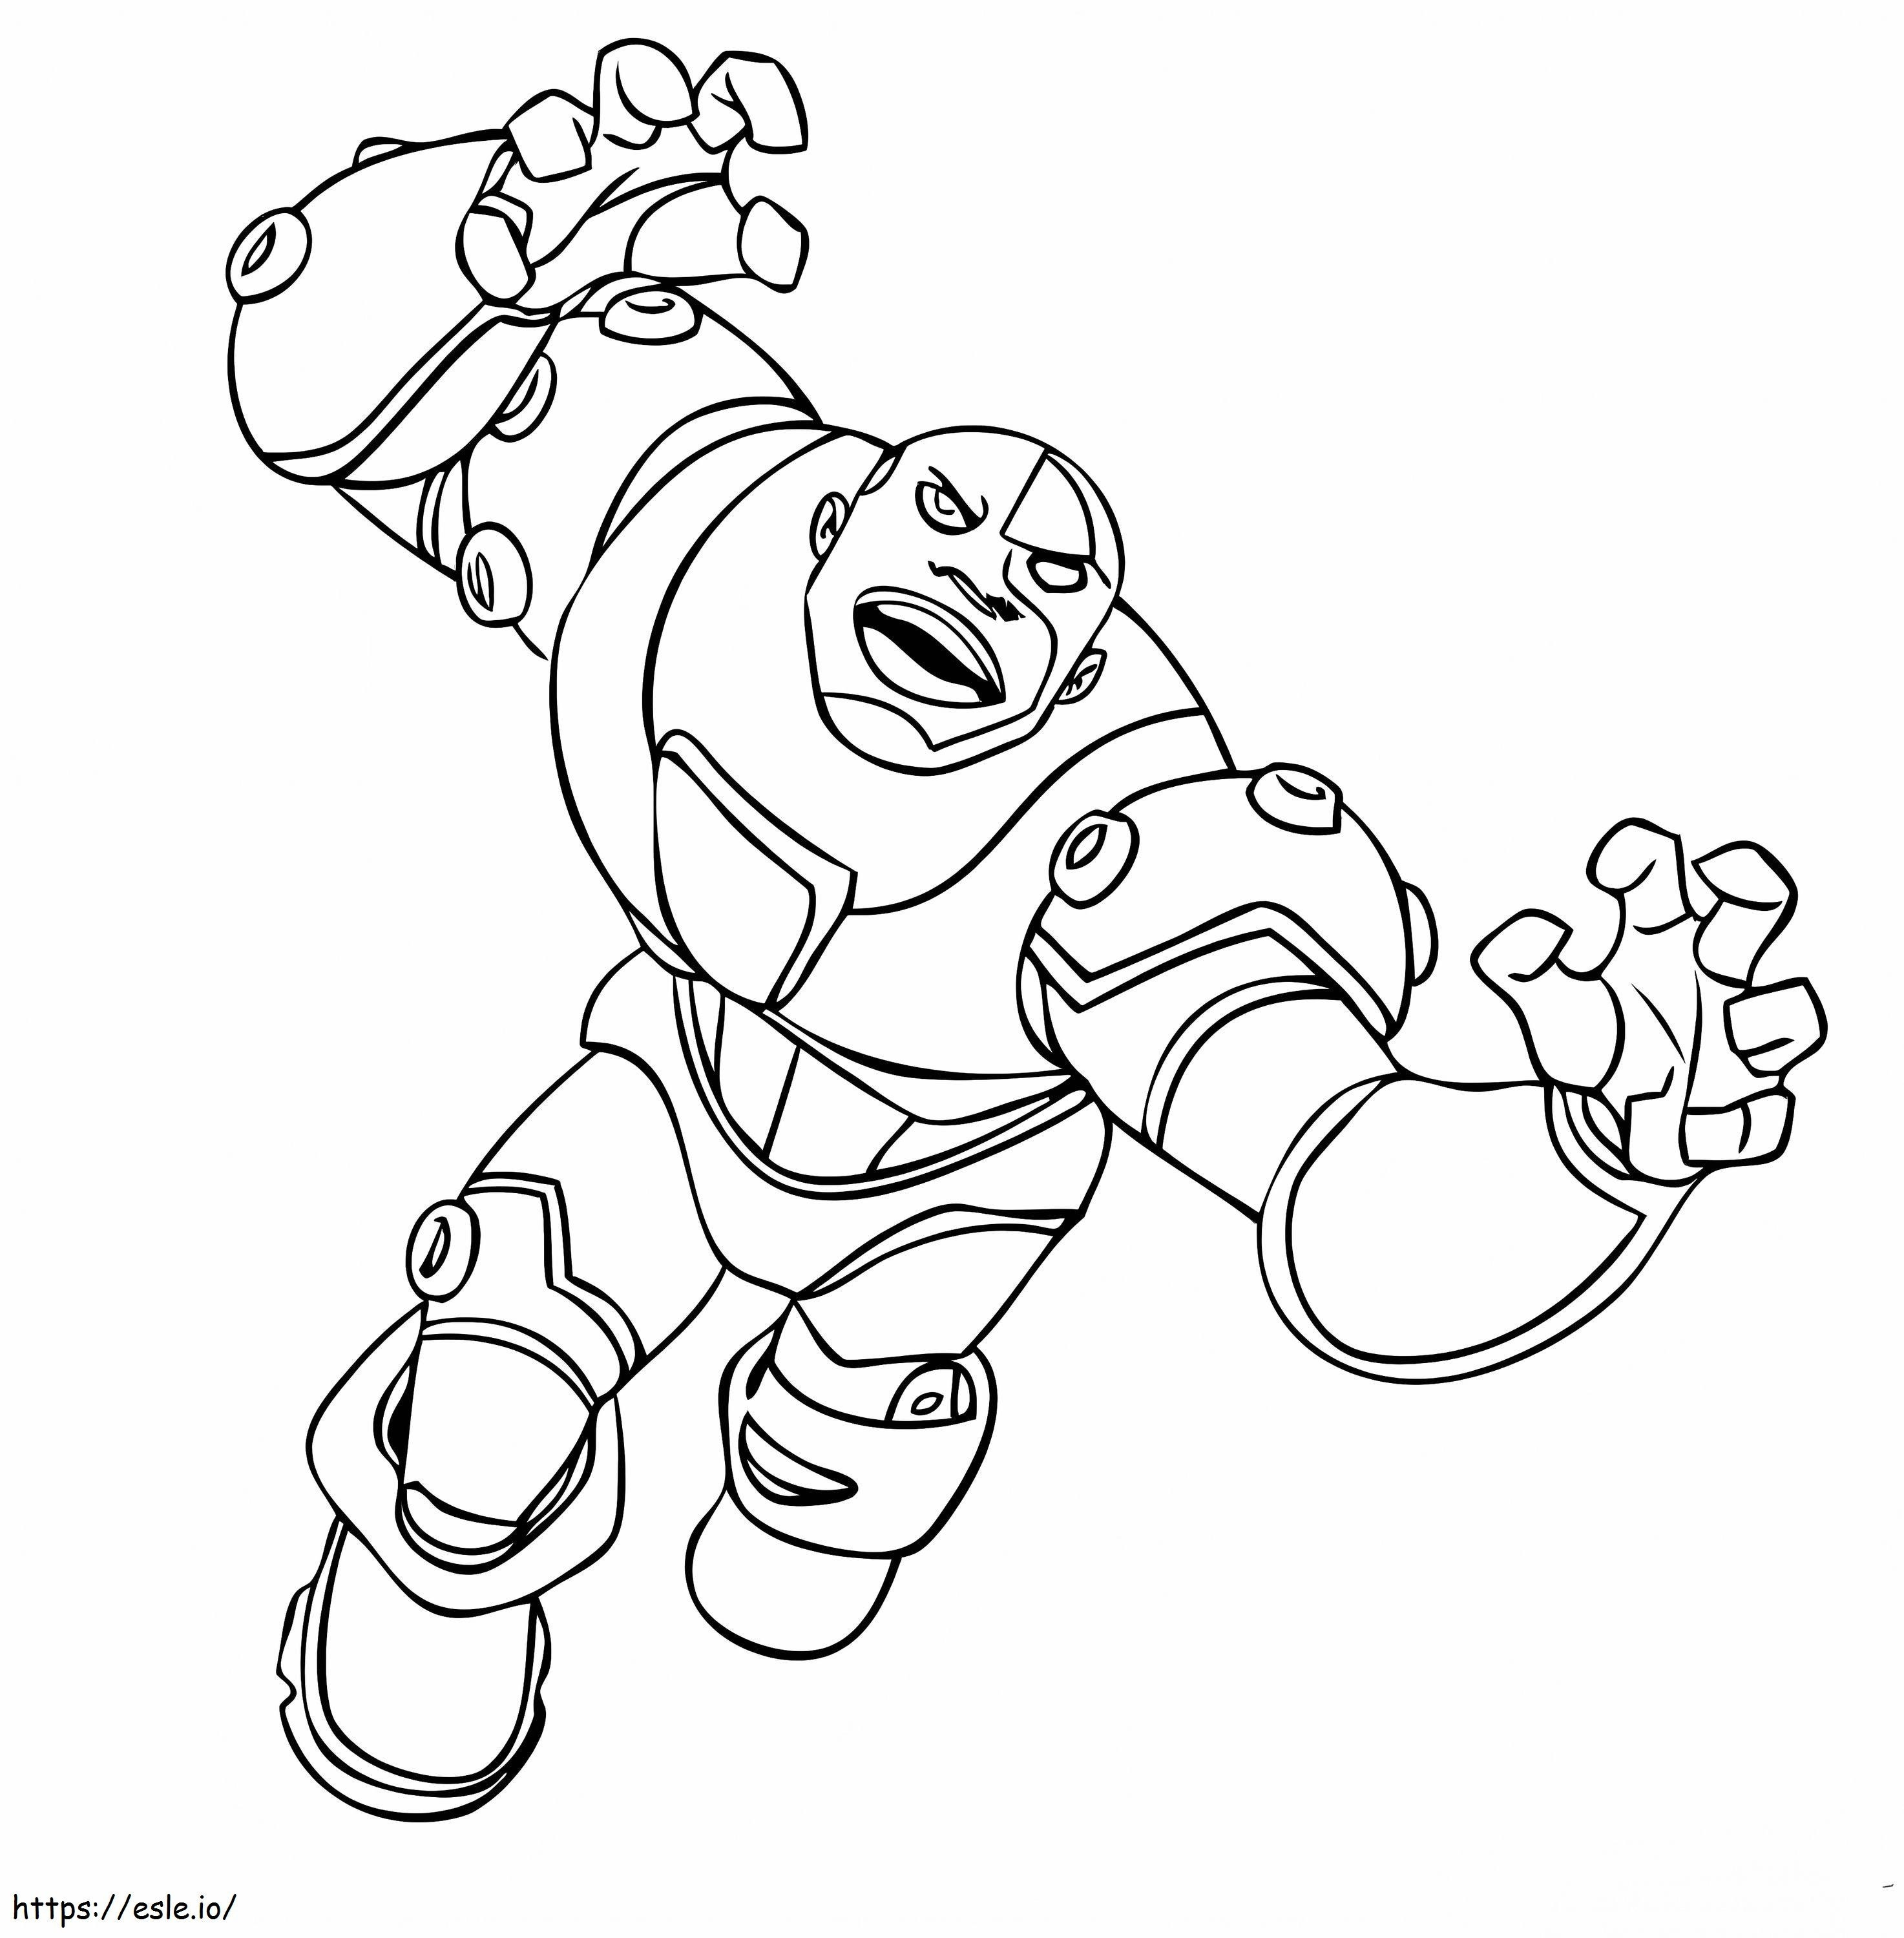 Cyborg Attack coloring page